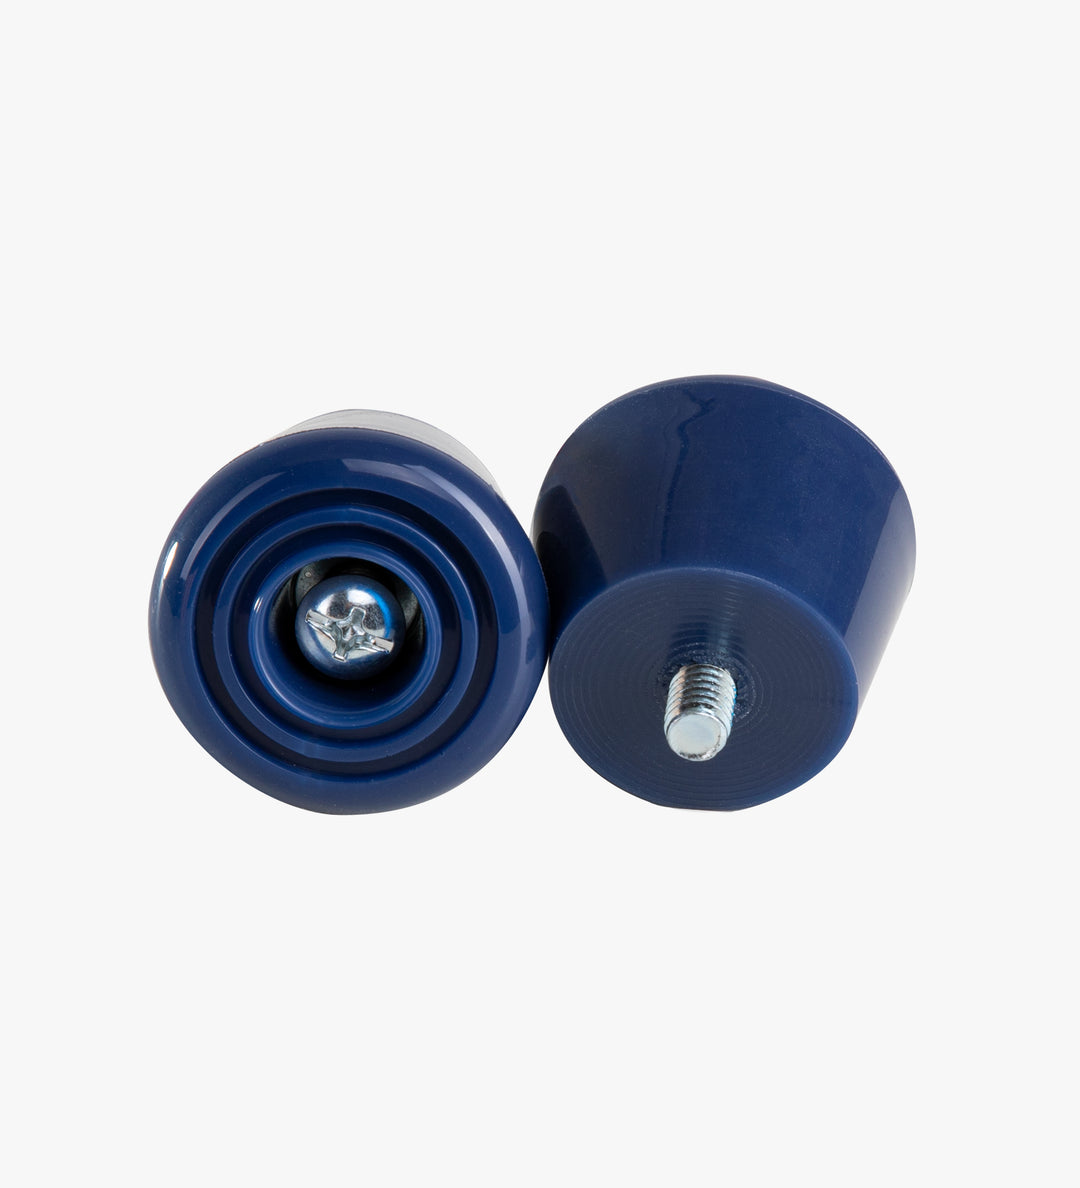 Blossom dark blue C7 roller skate stoppers made from durable polyurethane PU82A dimensions are 47 by 35 mm 